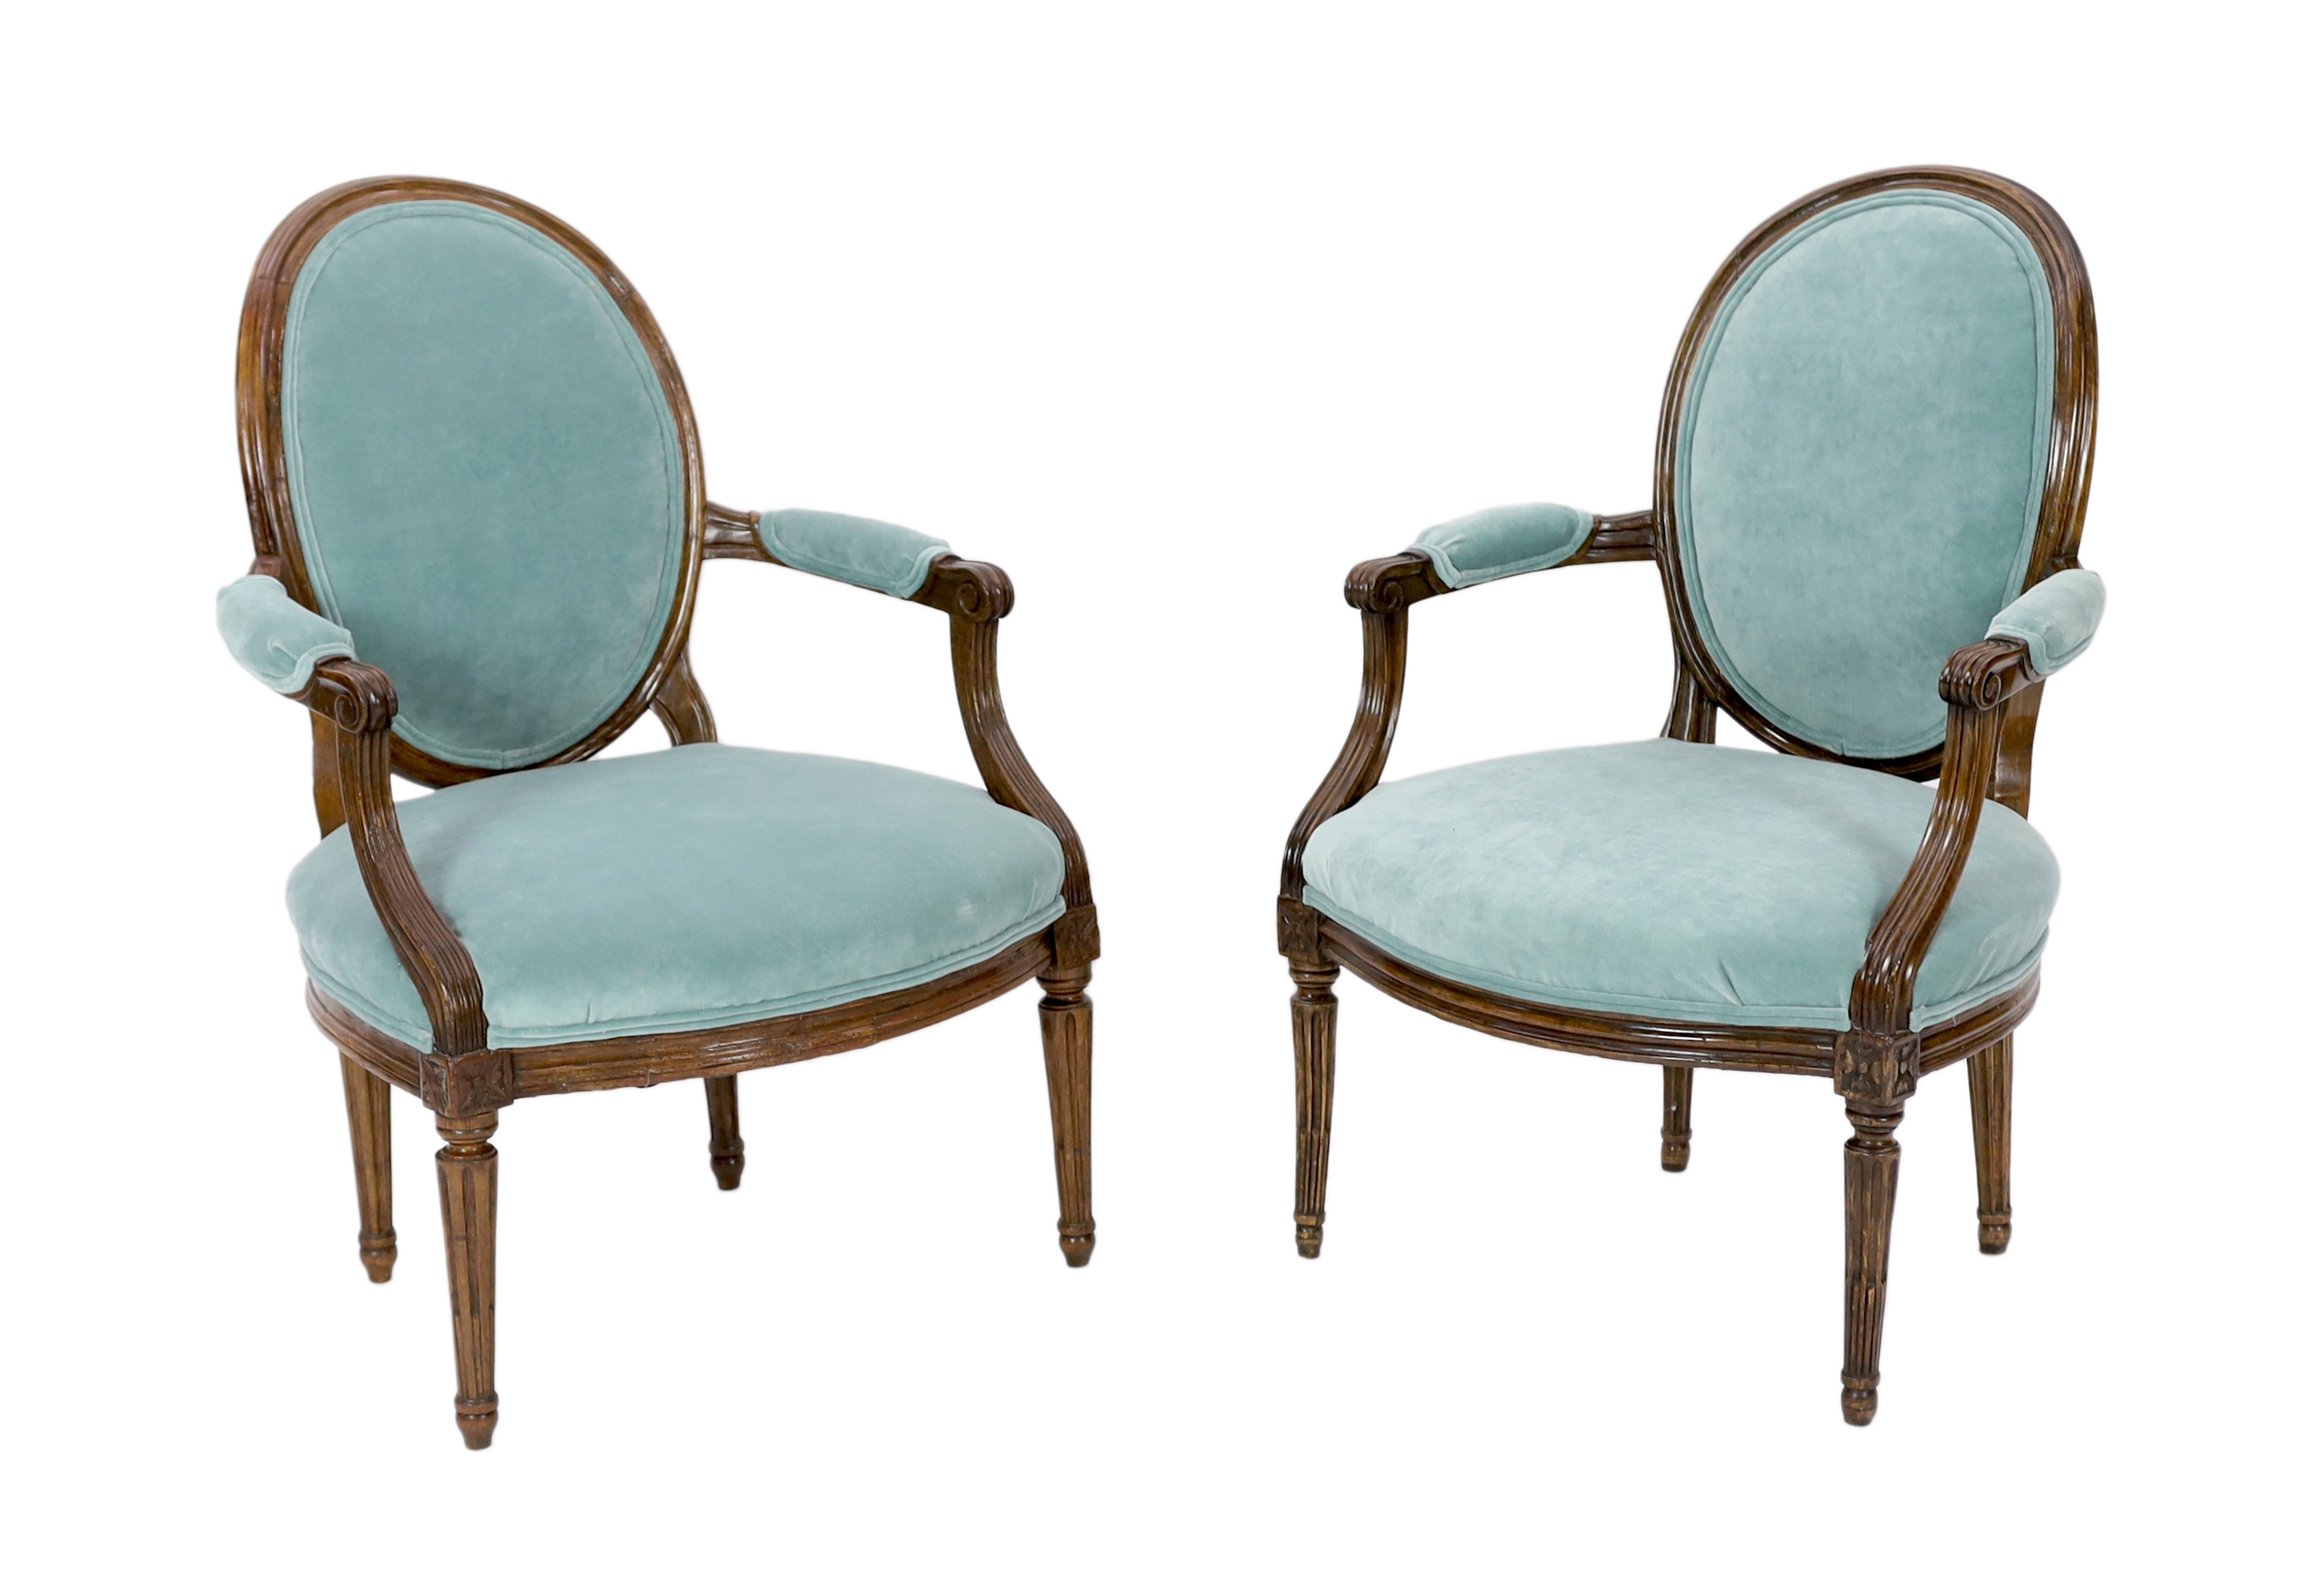 Churchill, Winston S. (1874-1965) - From Sir Winston’s London home at 28, Hyde Park Gate - Two similar Louis XVI provincial open armchairs                                                                                  